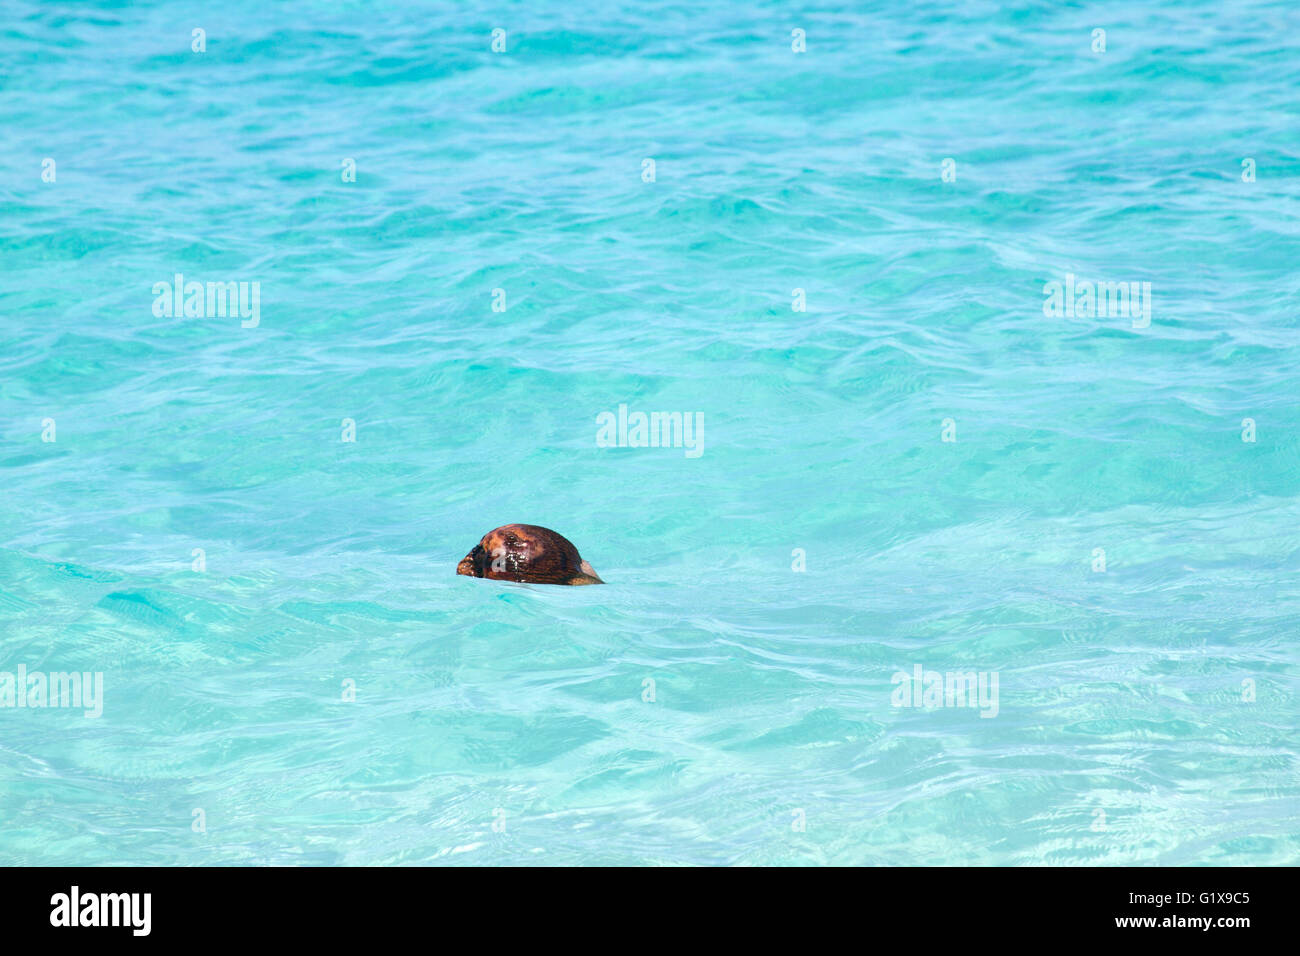 Coconut (Cocos nucifera) floating on the surface of the Caribbean Sea off the coast of St. John, US Virgin Islands Stock Photo